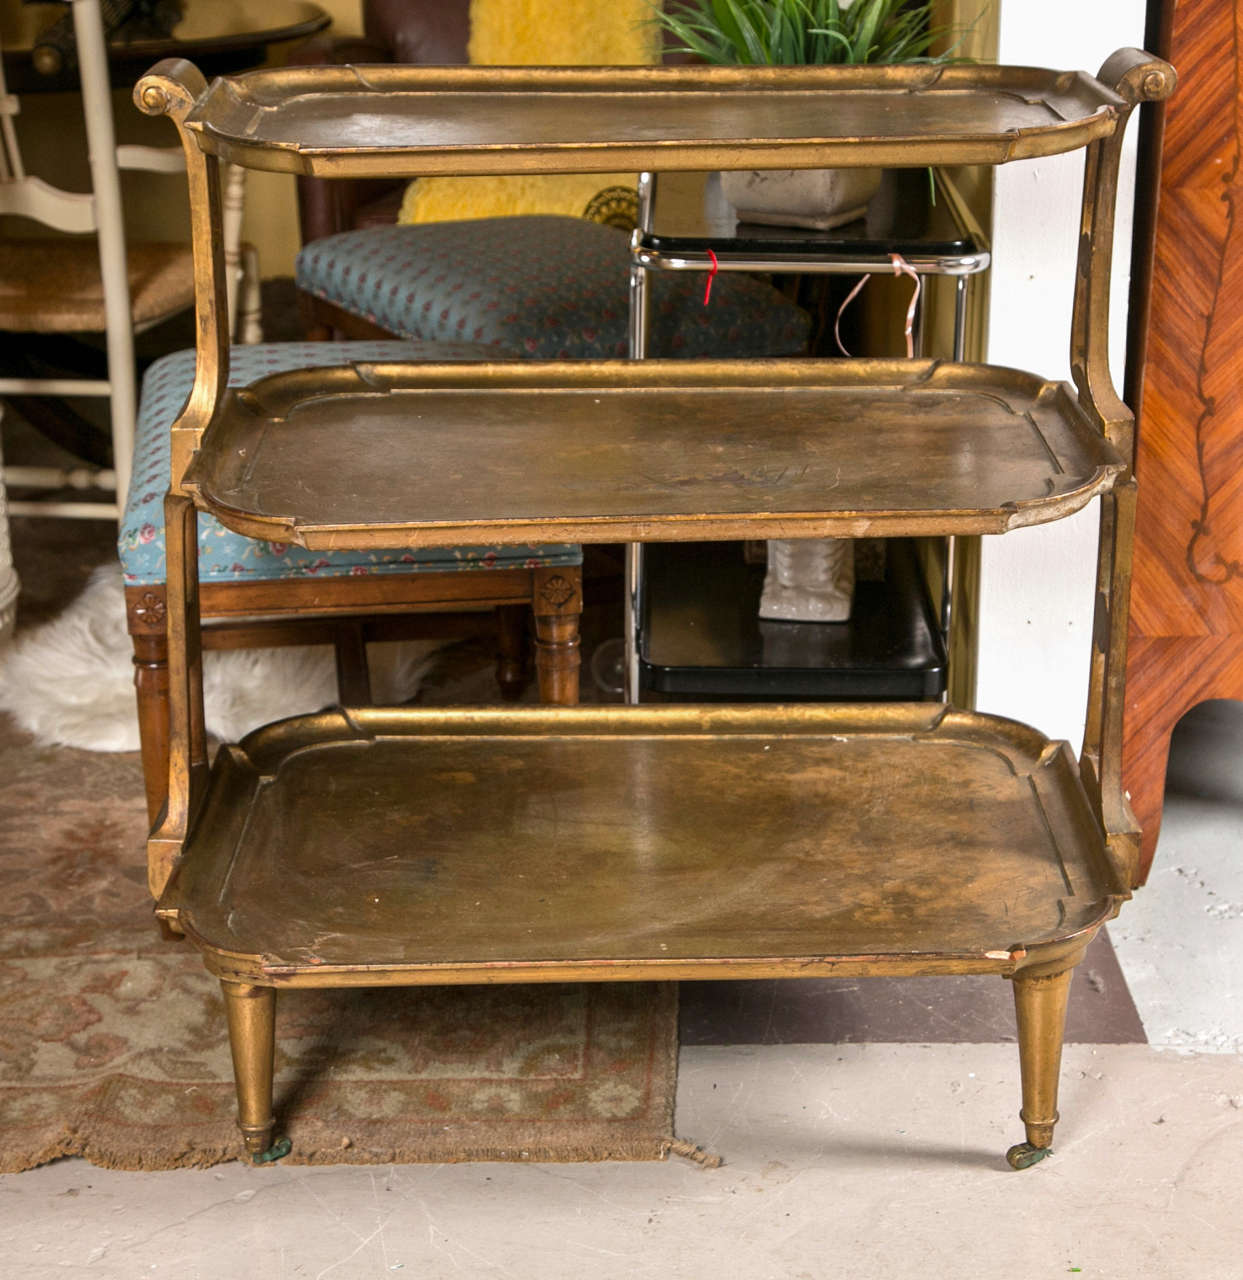 A Hollywood Regency Three Teir Serving Cart Tea Wagon. A fine wooden gilt gold decorated Serving Cart. The bronze casters on tapering Louis XVI style legs leading to a group of three shelves supported by flowing curved sides adorning handles. The